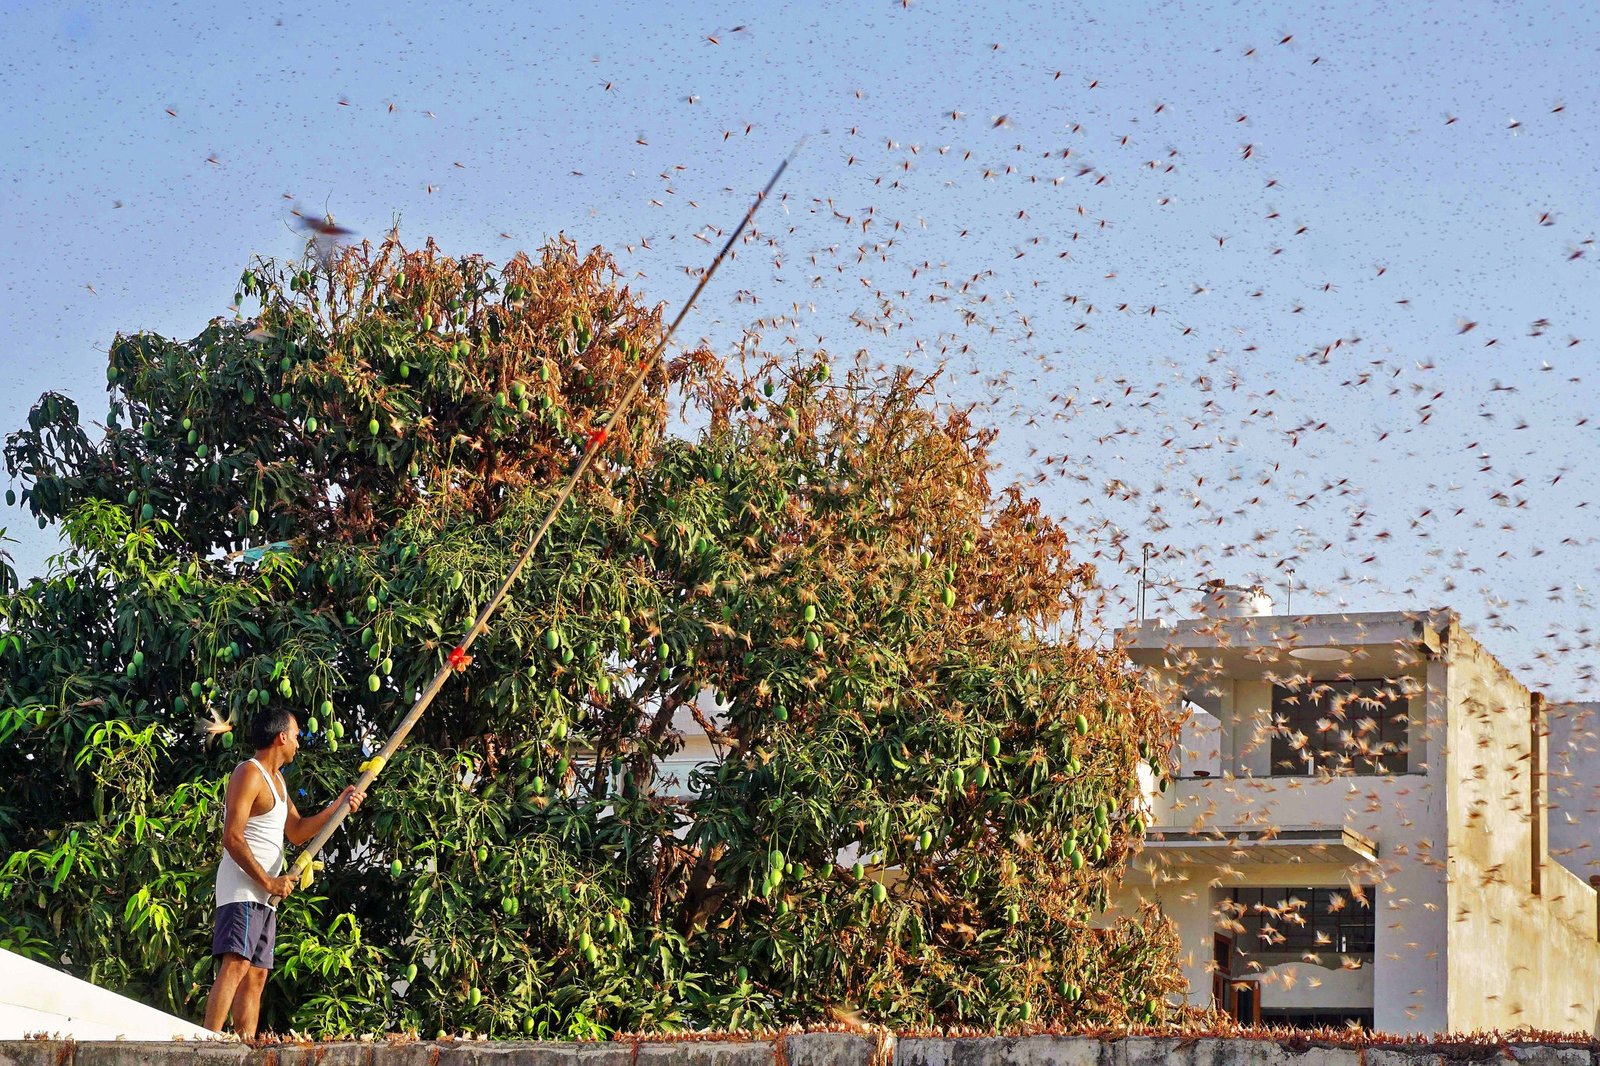 No locust adults or hoppers spotted in any of the affected areas As per Food and Agriculture Organization’s latest Locust Status Update, the risk of swarm migration to the Indo-Pakistan summer breeding area has nearly subsided